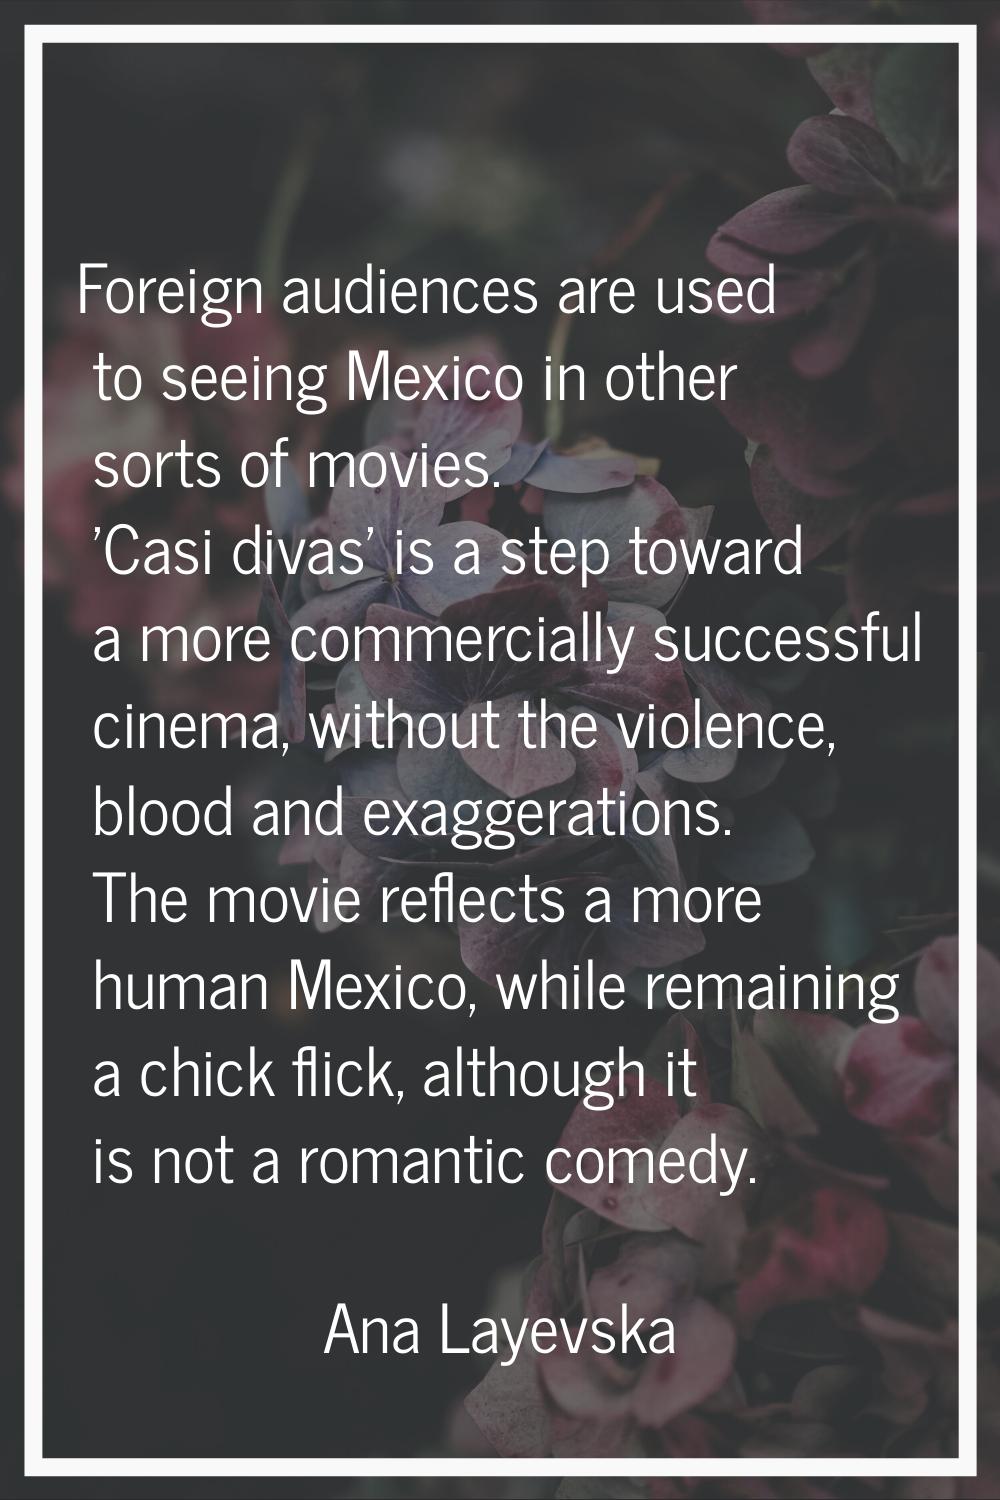 Foreign audiences are used to seeing Mexico in other sorts of movies. 'Casi divas' is a step toward